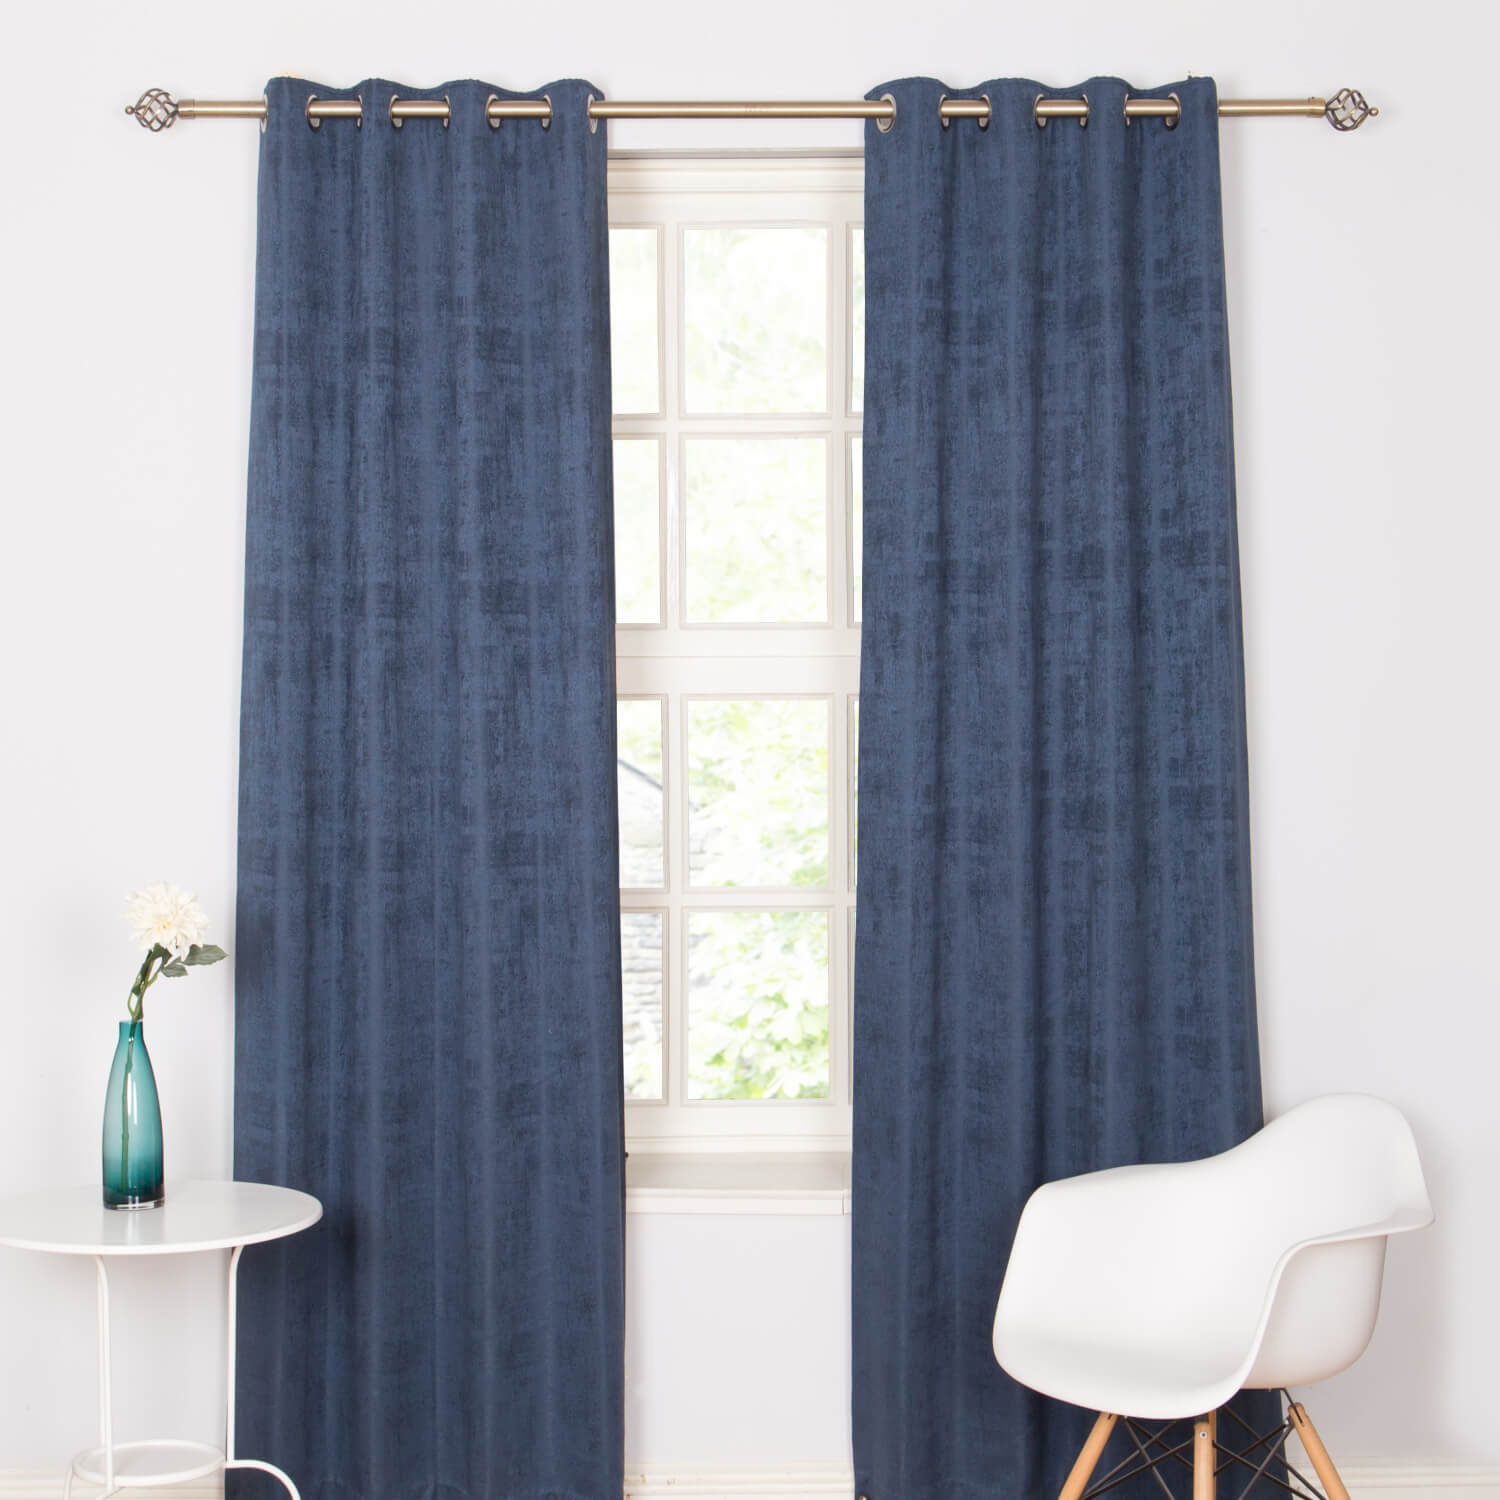 The Home Living Room Fiesta Ring Top Curtains - Midnight 1 Shaws Department Stores